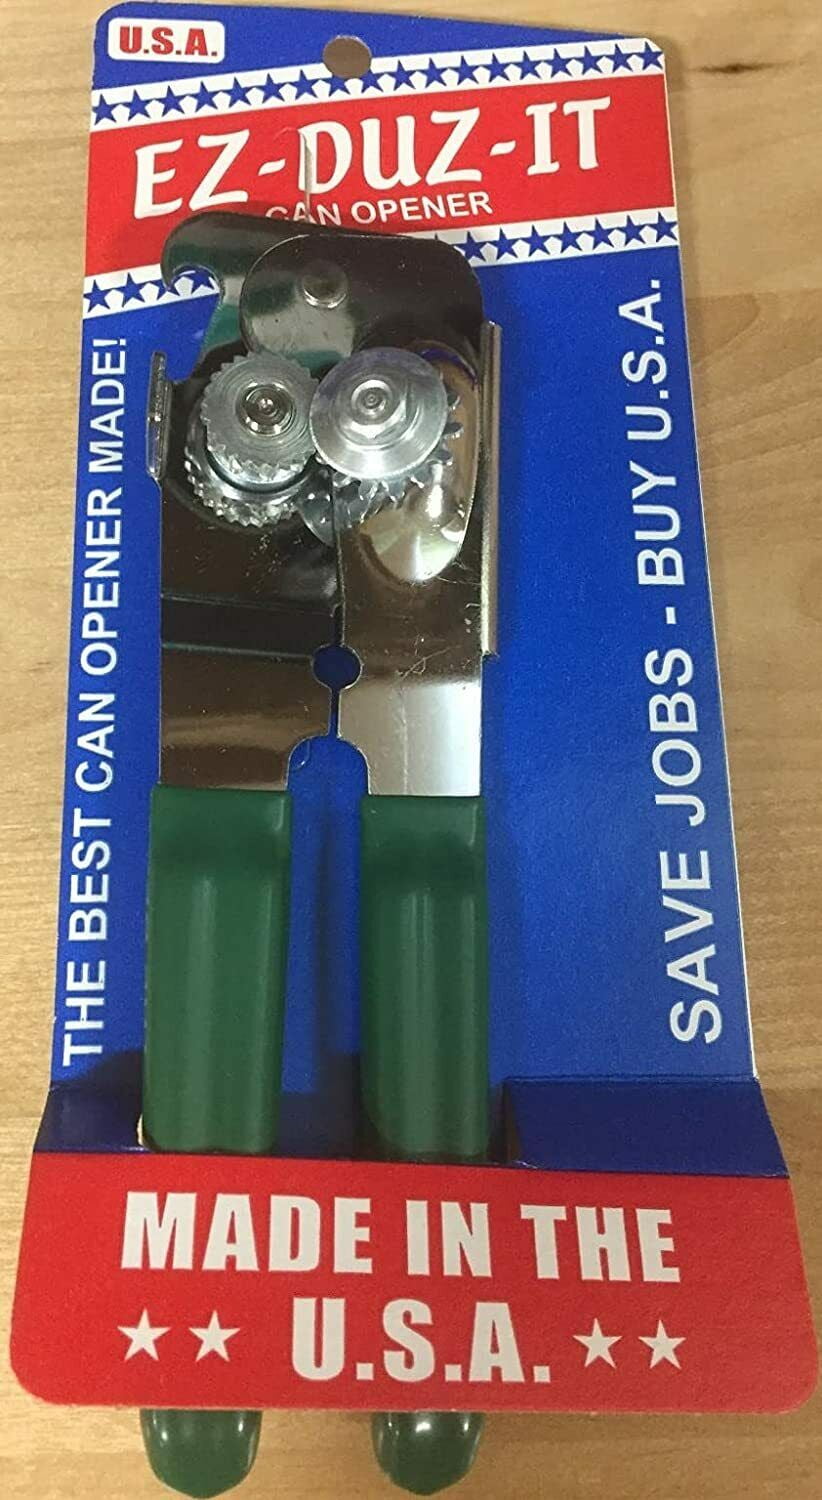 EZ DUZ IT Made in the USA Manual CAN OPENER w/ Green Grips